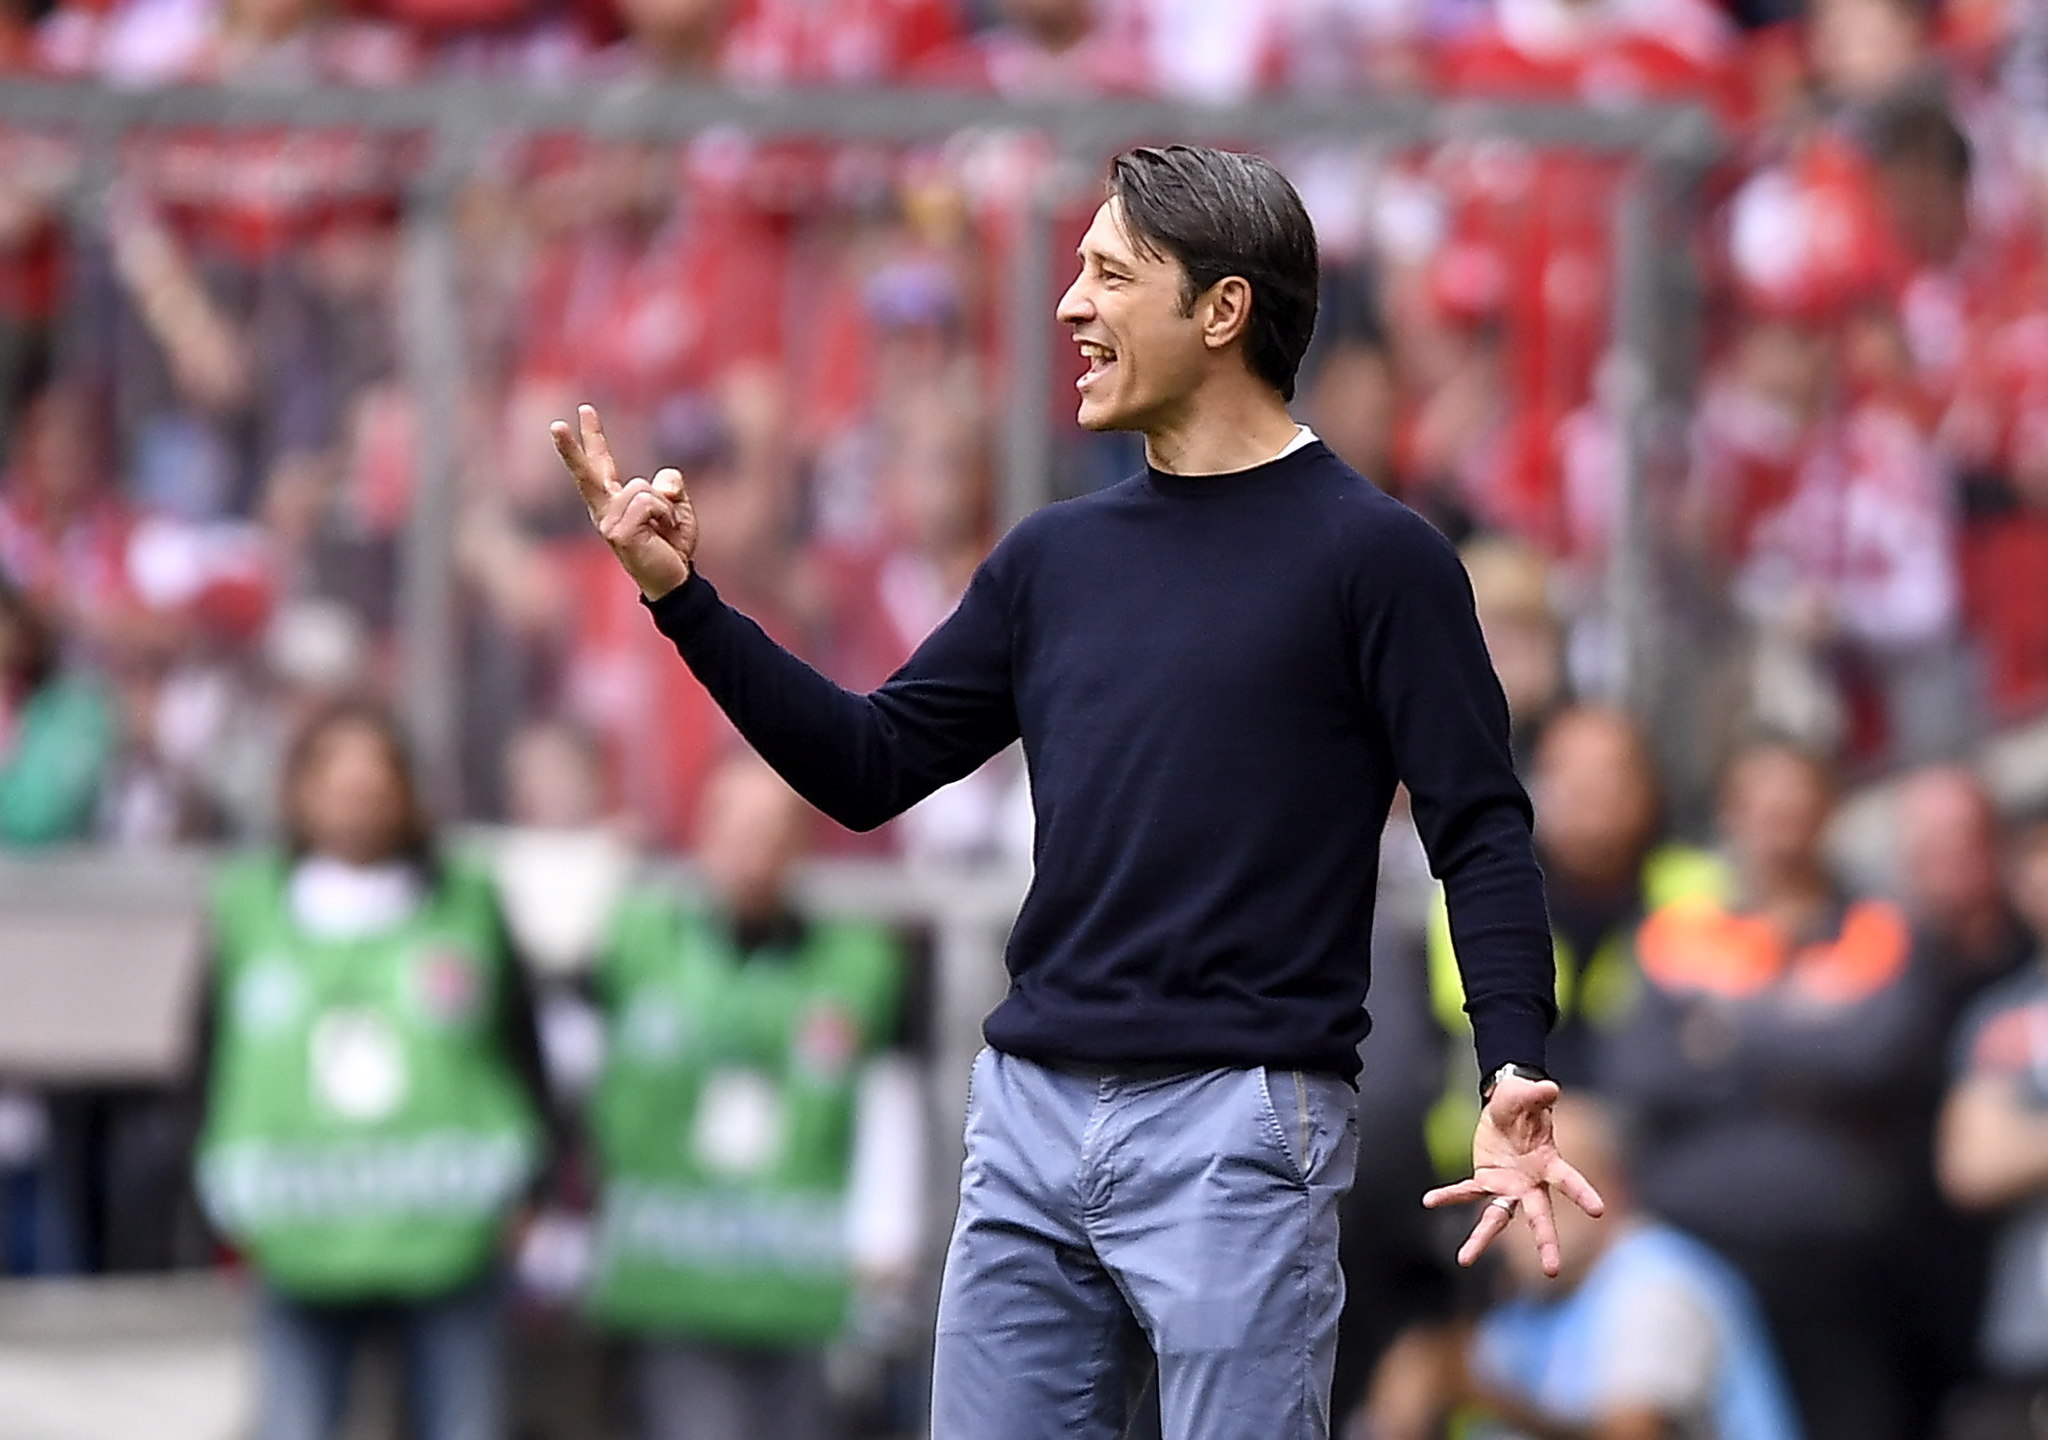 Munich (Germany), 18/05/2019.- <HIT>Bayern</HIT>s head coach Niko Kovac reacts during the German Bundesliga soccer match between FC <HIT>Bayern</HIT> Munich and Eintracht Frankfurt in Munich, Germany, 18 May 2019. (Alemania) EFE/EPA/LUKAS BARTH-TUTTAS CONDITIONS - ATTENTION: The DFL regulations prohibit any use of photographs as image sequences and/or quasi-video